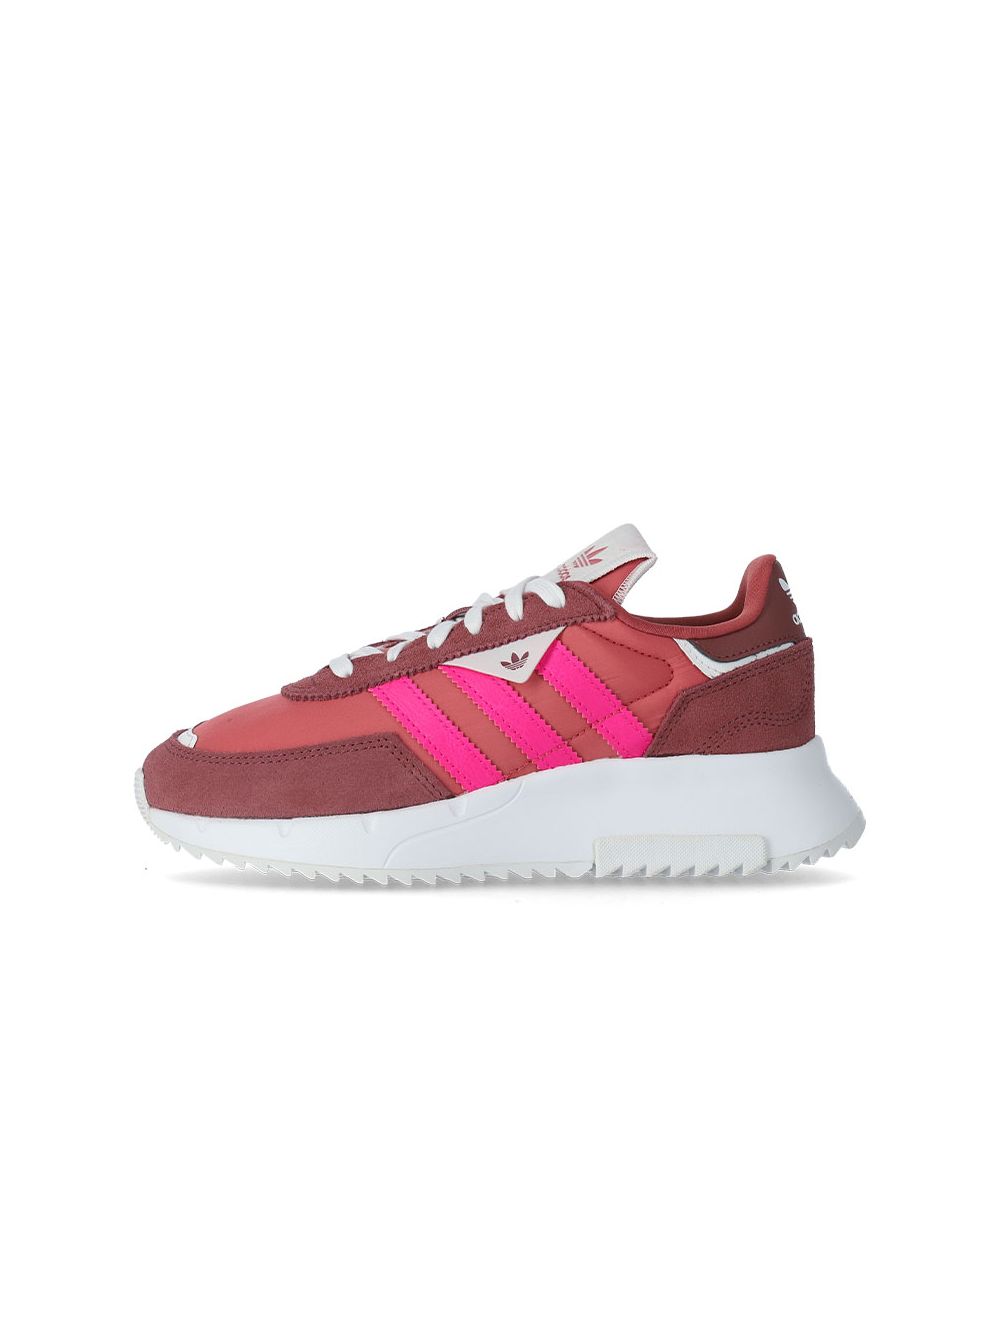 adidas Originals Retropy F2 Youth Sneaker White Red Pink